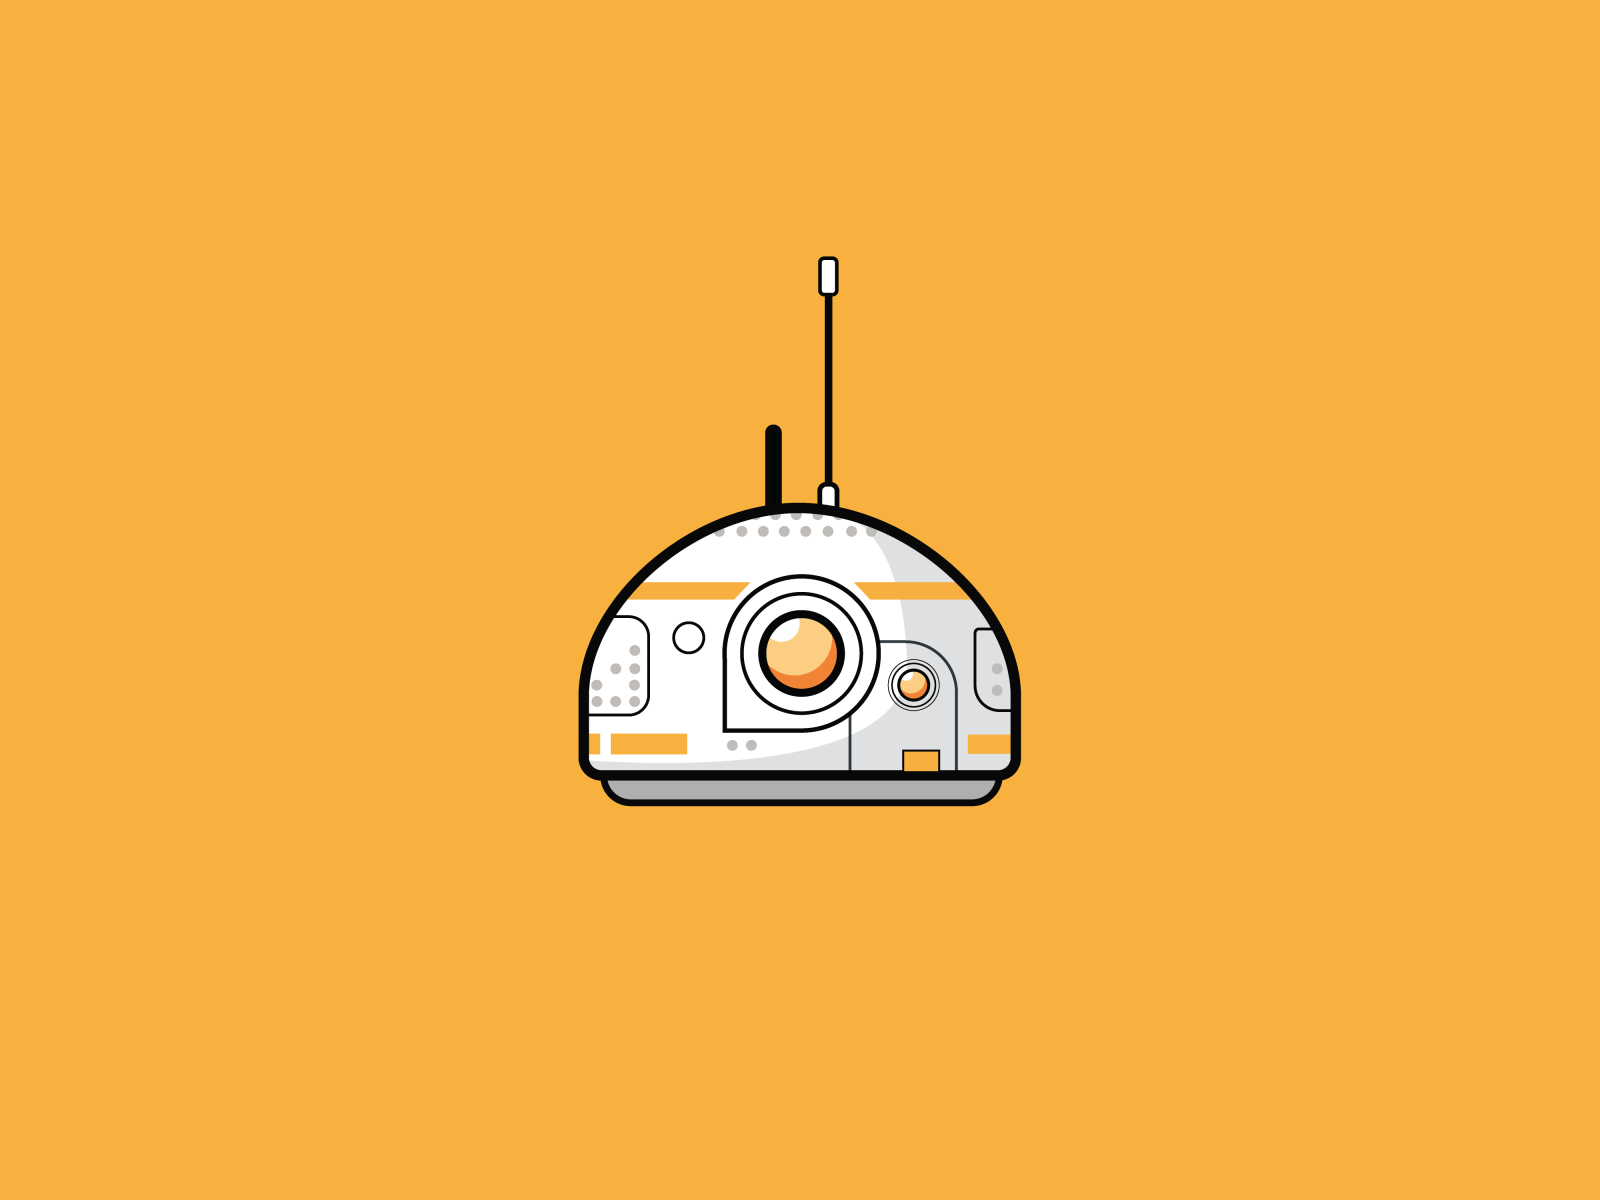 8 Star Wars By Wirral Graphic Designer On Dribbble